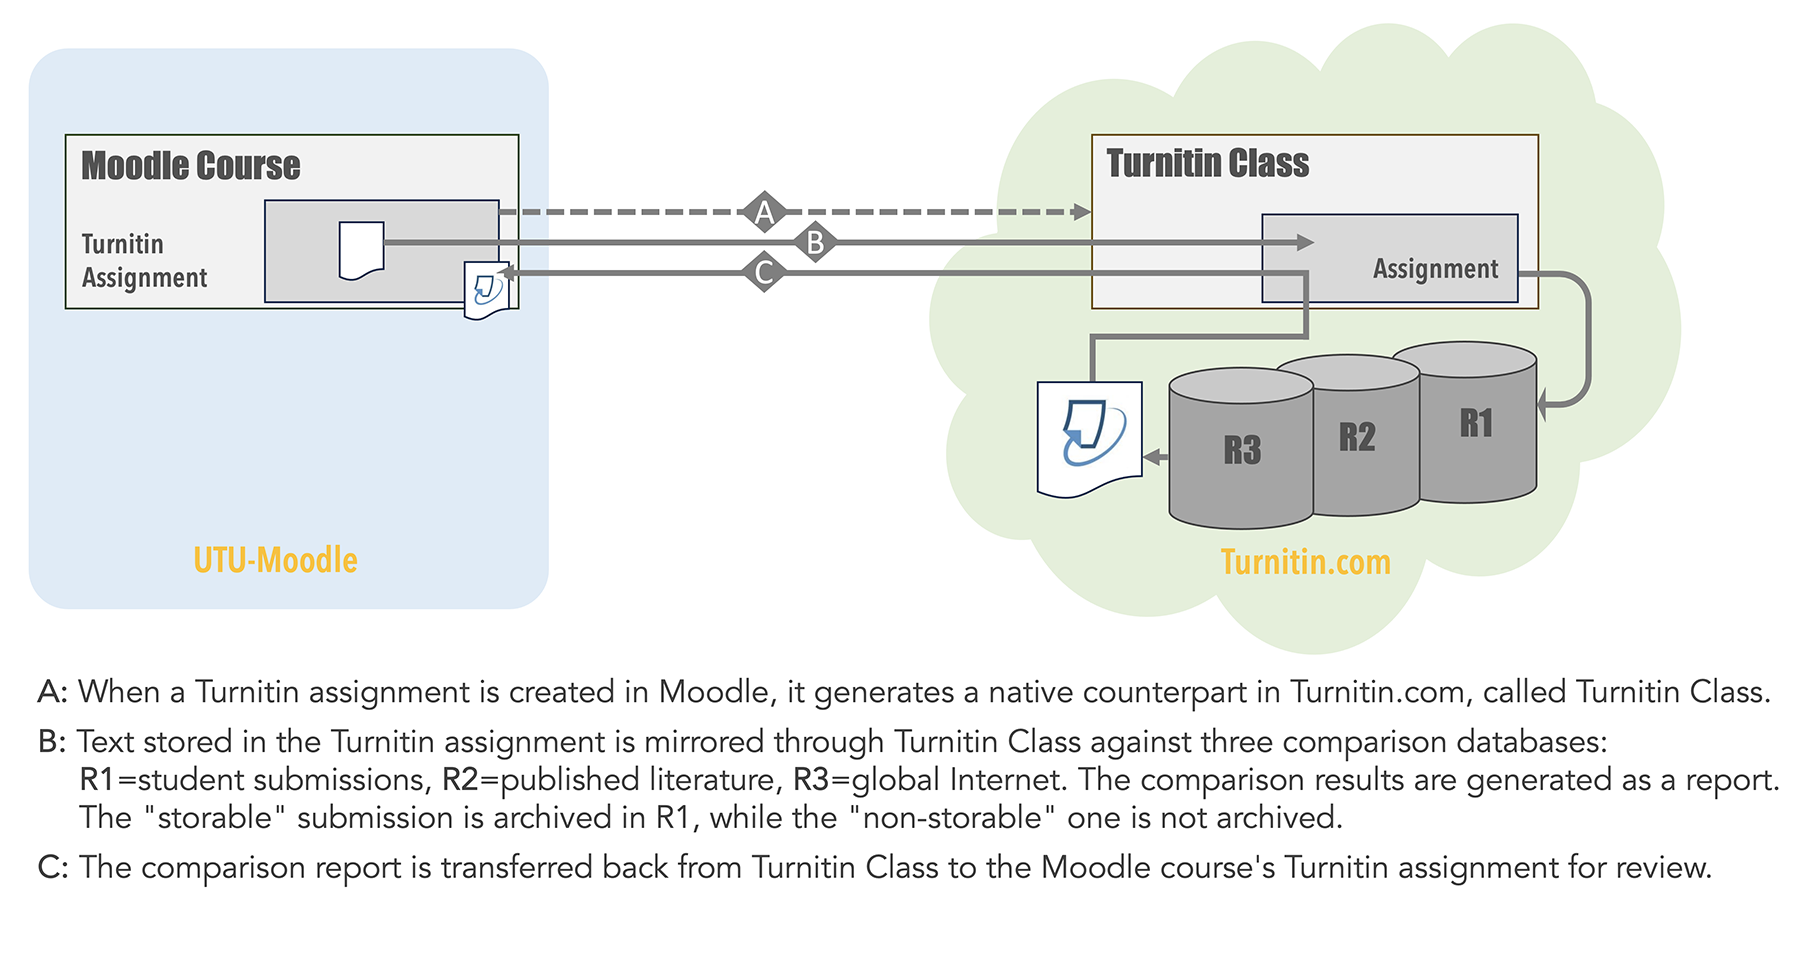 A description of the process by which information is transferred from a Turnitin assignment in a Moodle course to the Class area on Turnitin.com, where it is reflected in the reference databases, and subsequently returns as an assessment report to the Moodle interface.